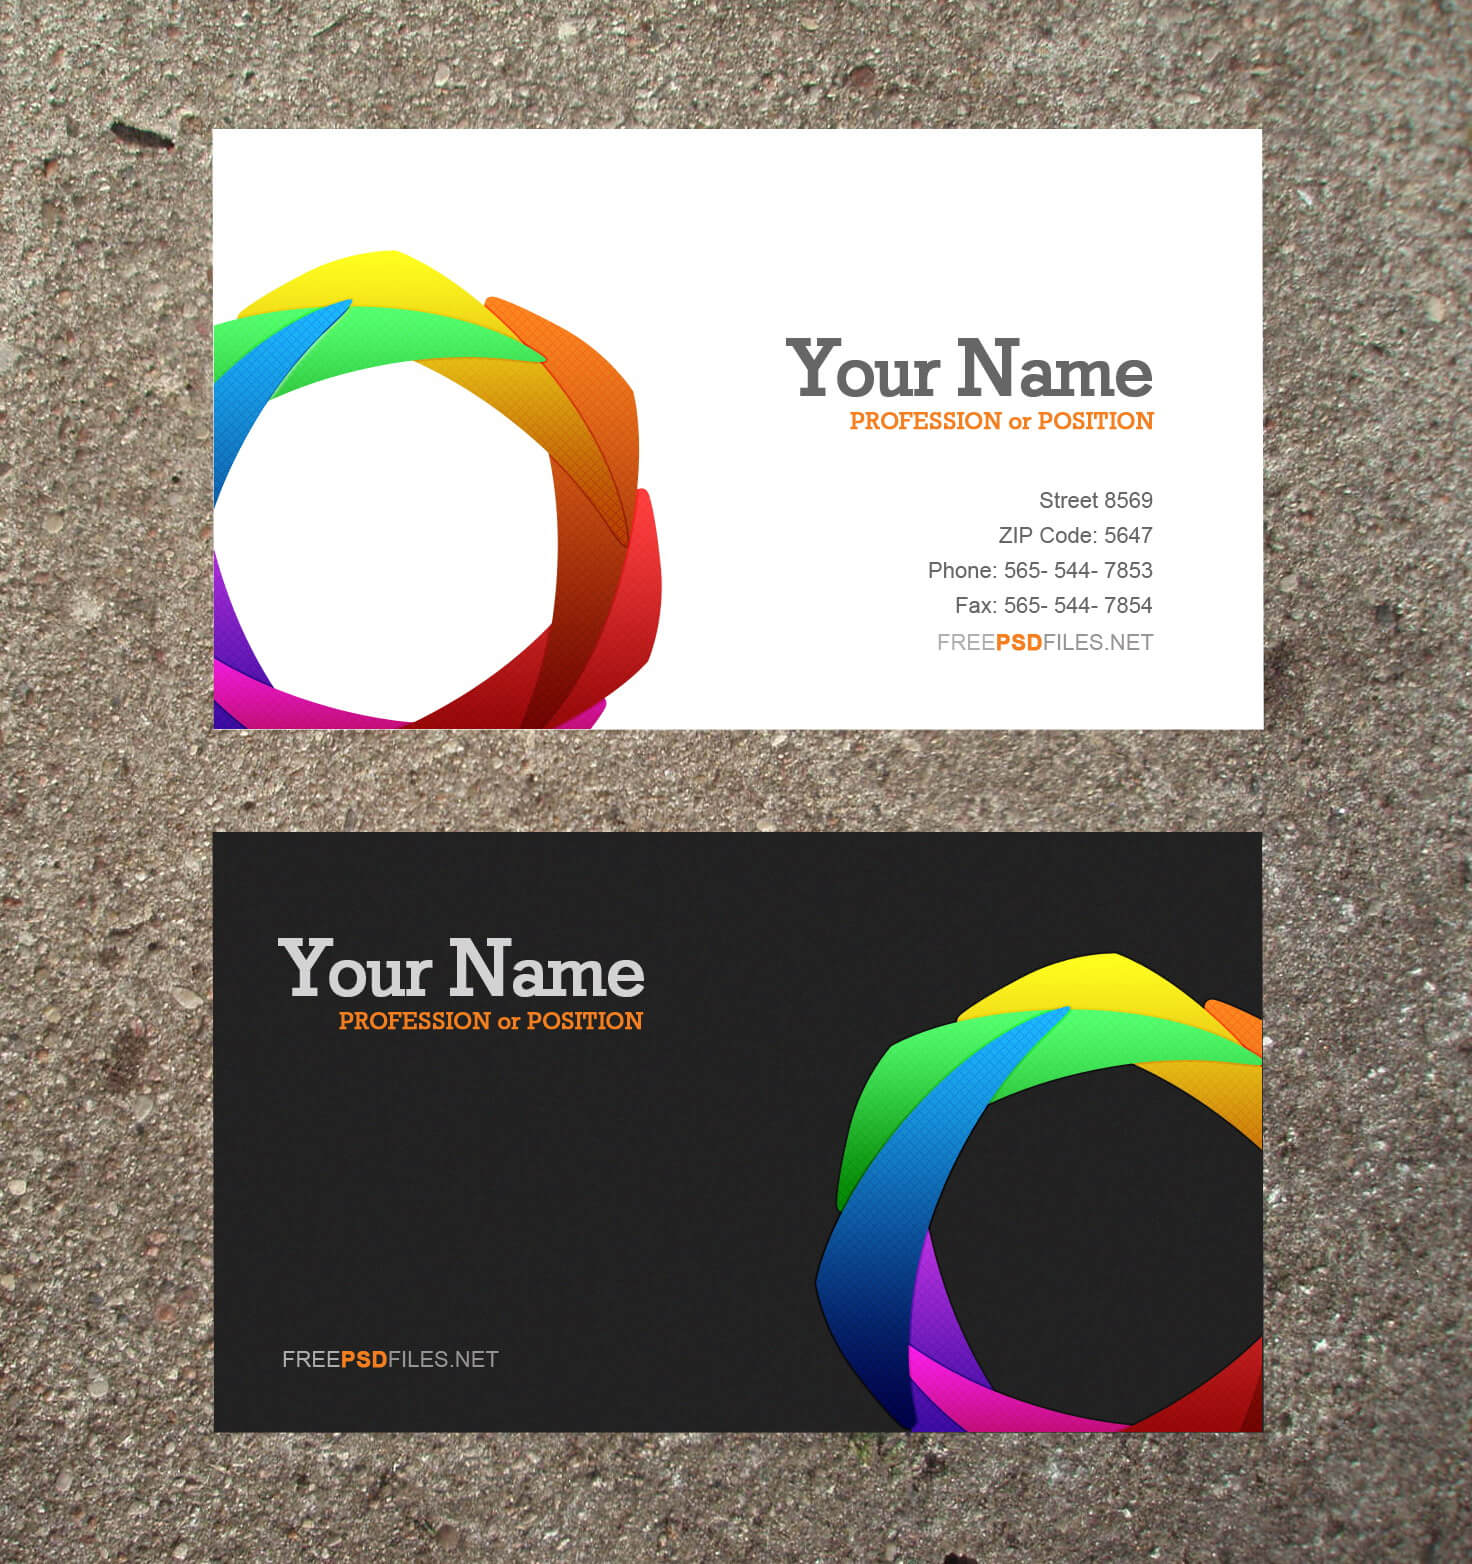 Free Business Cards Design Your Own And Print – Yeppe Intended For Microsoft Templates For Business Cards